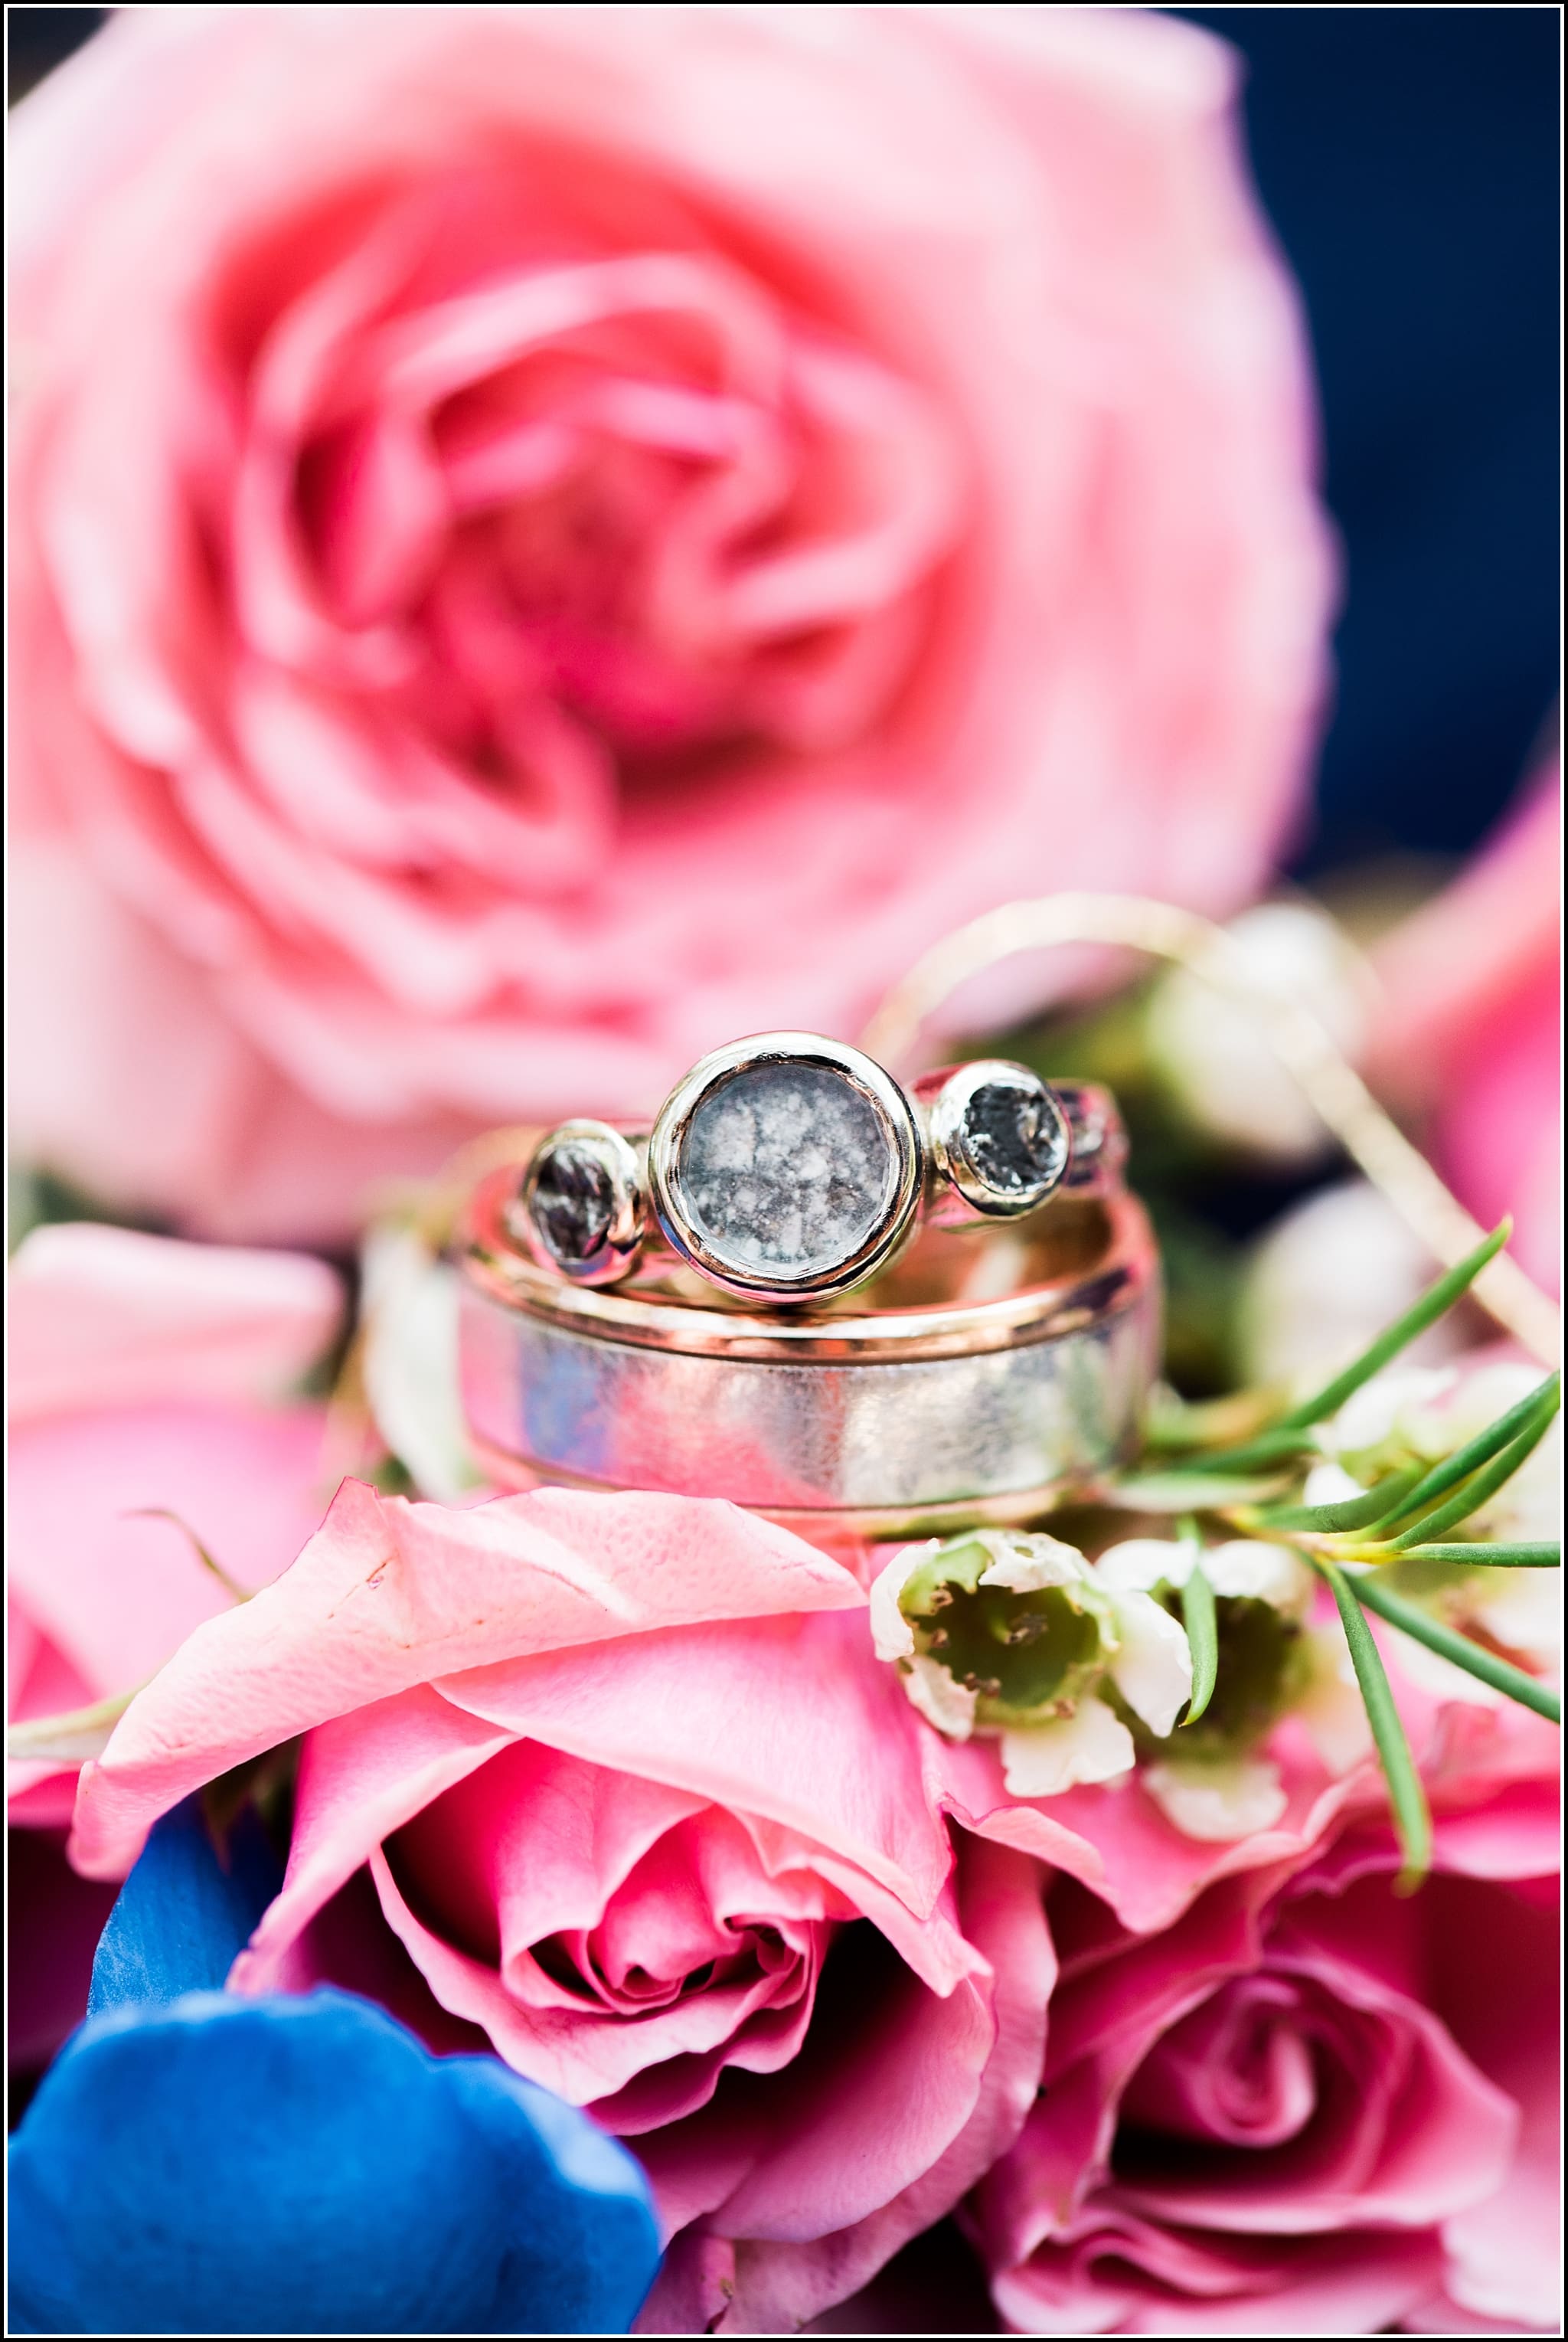 moon and stars ring, cosmic wedding ring, favorite wedding images 2016, wedding photos from 2016, our favorite wedding photos